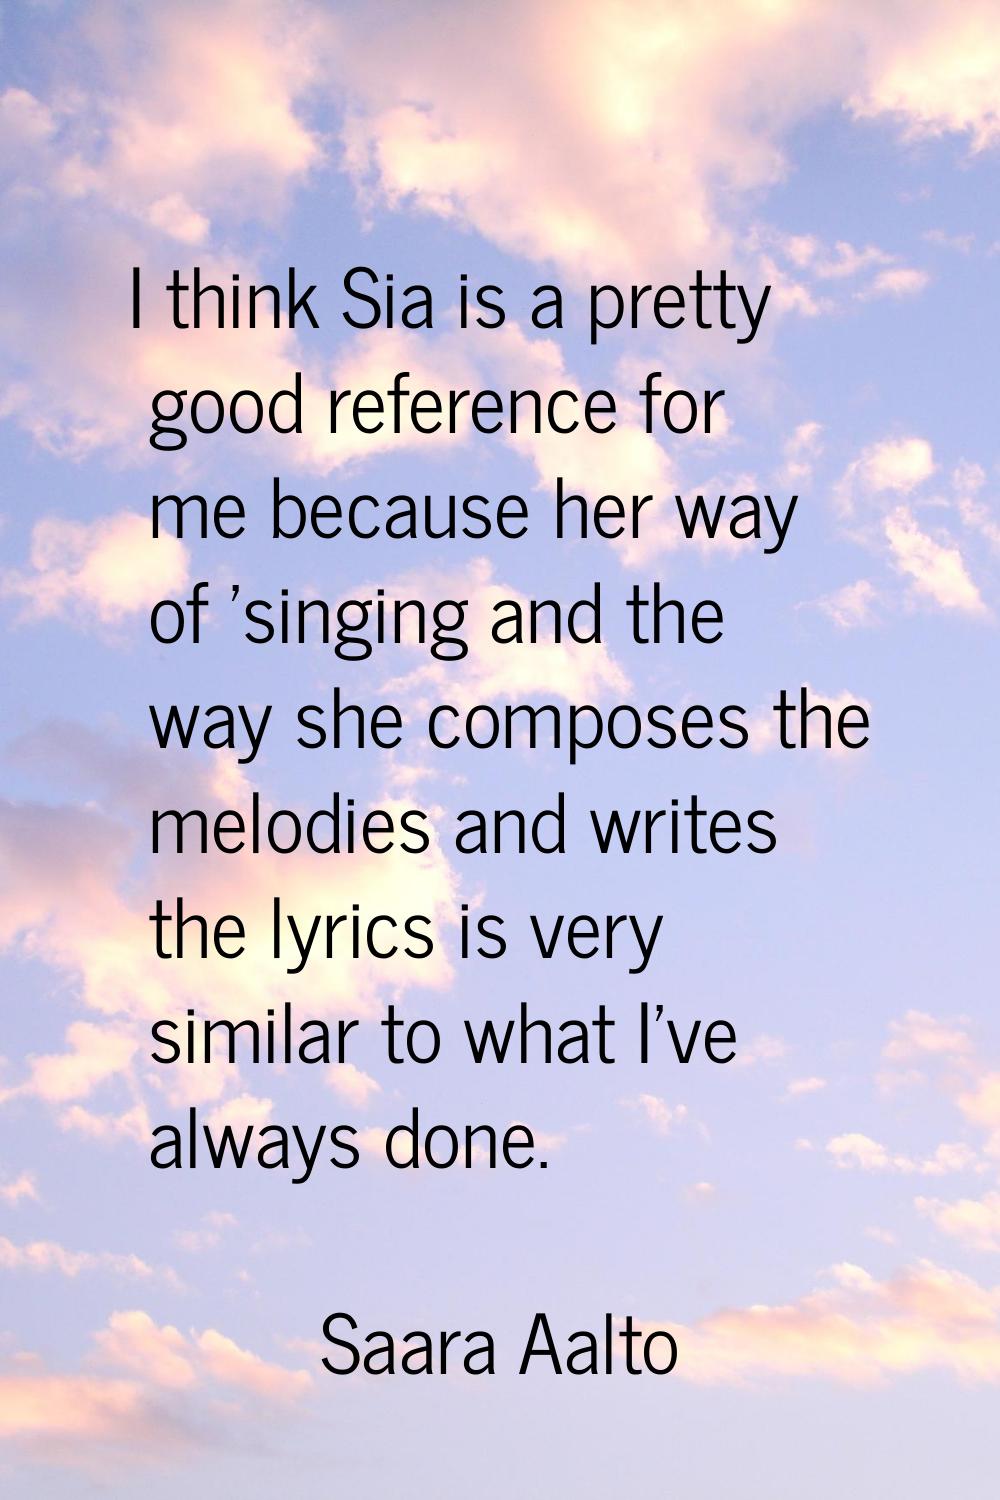 I think Sia is a pretty good reference for me because her way of 'singing and the way she composes 